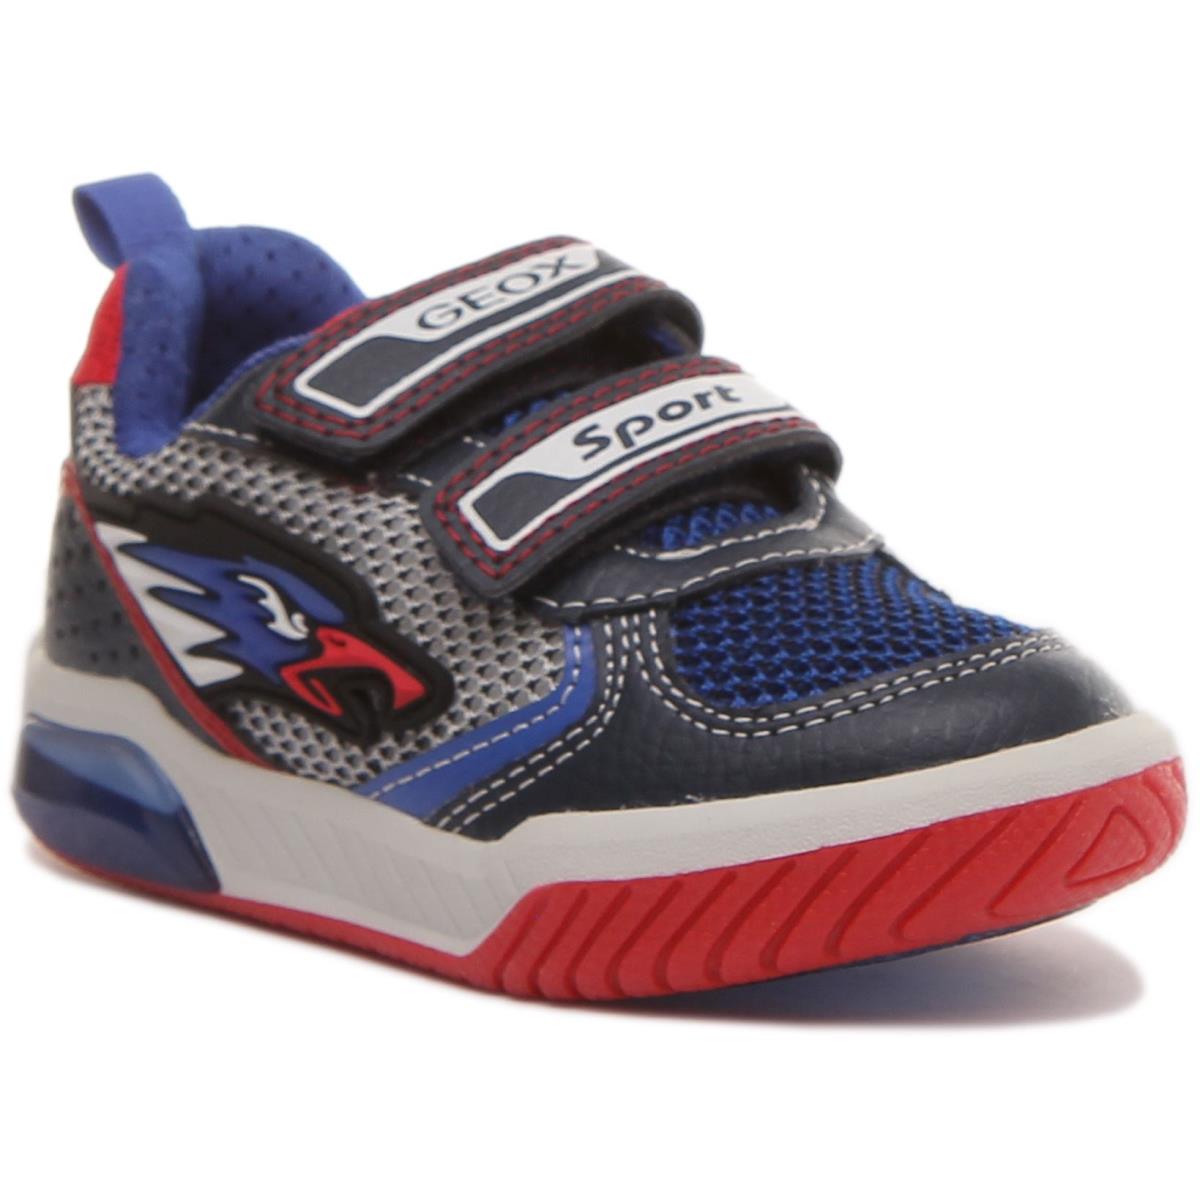 Geox Inek B. B Kids Two Straps Led Light Sneakers In Navy Red Size US 1 - 4 NAVY RED